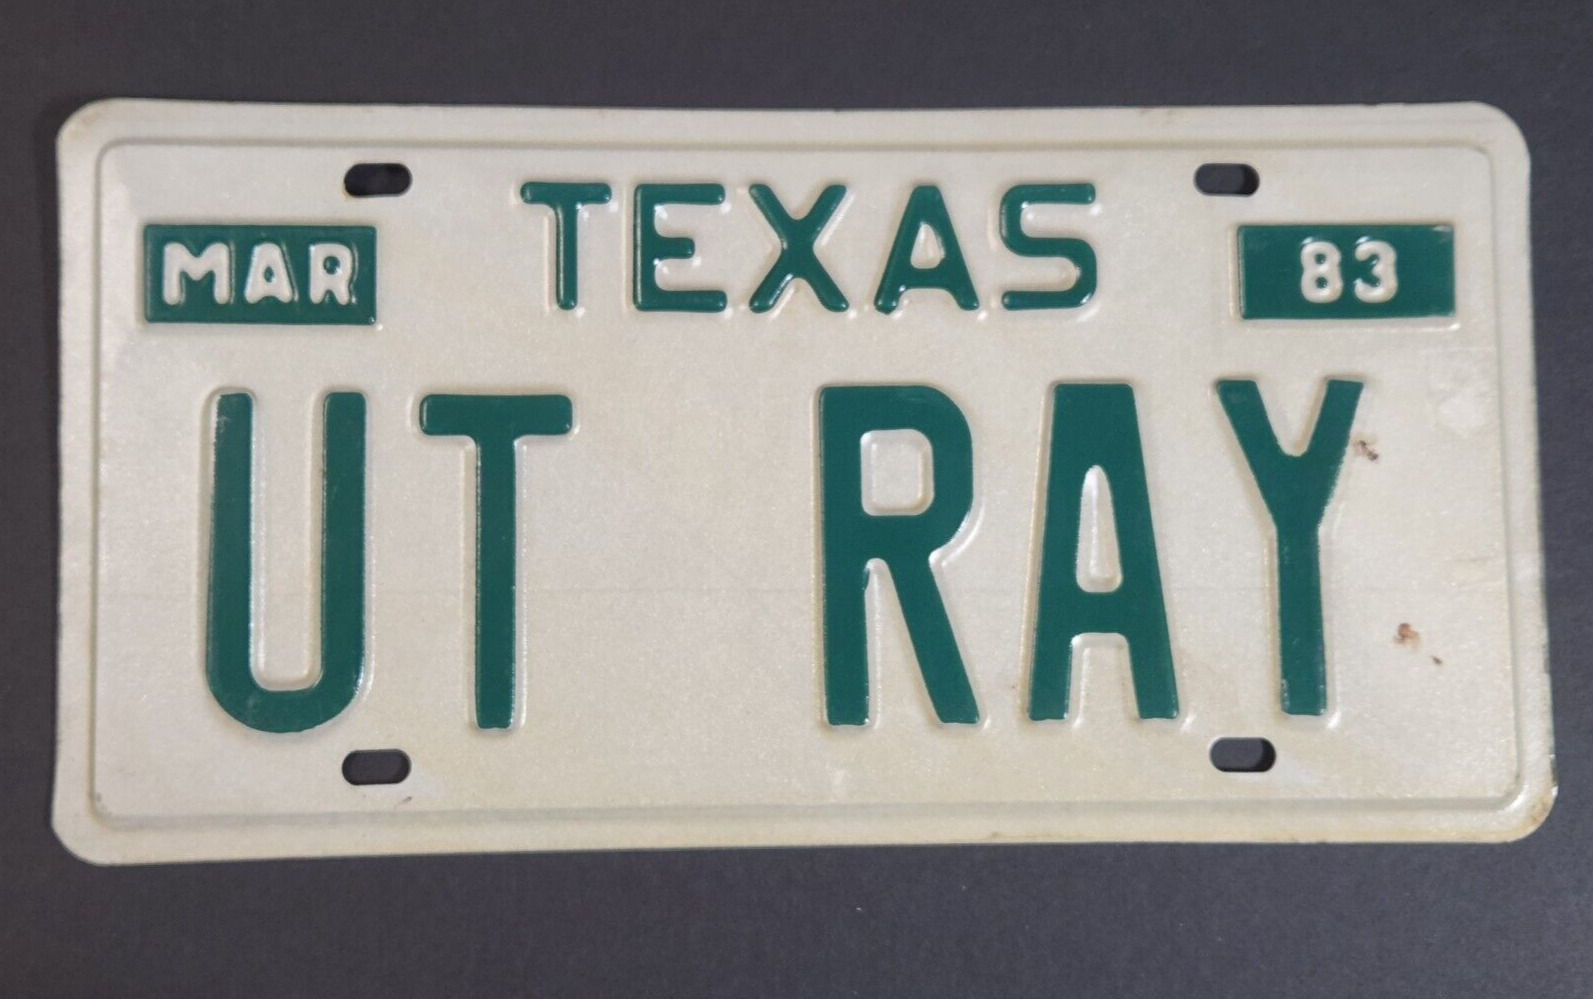 Vintage 1983 Texas License Plate (UT-RAY) Expired March Green Letters on White